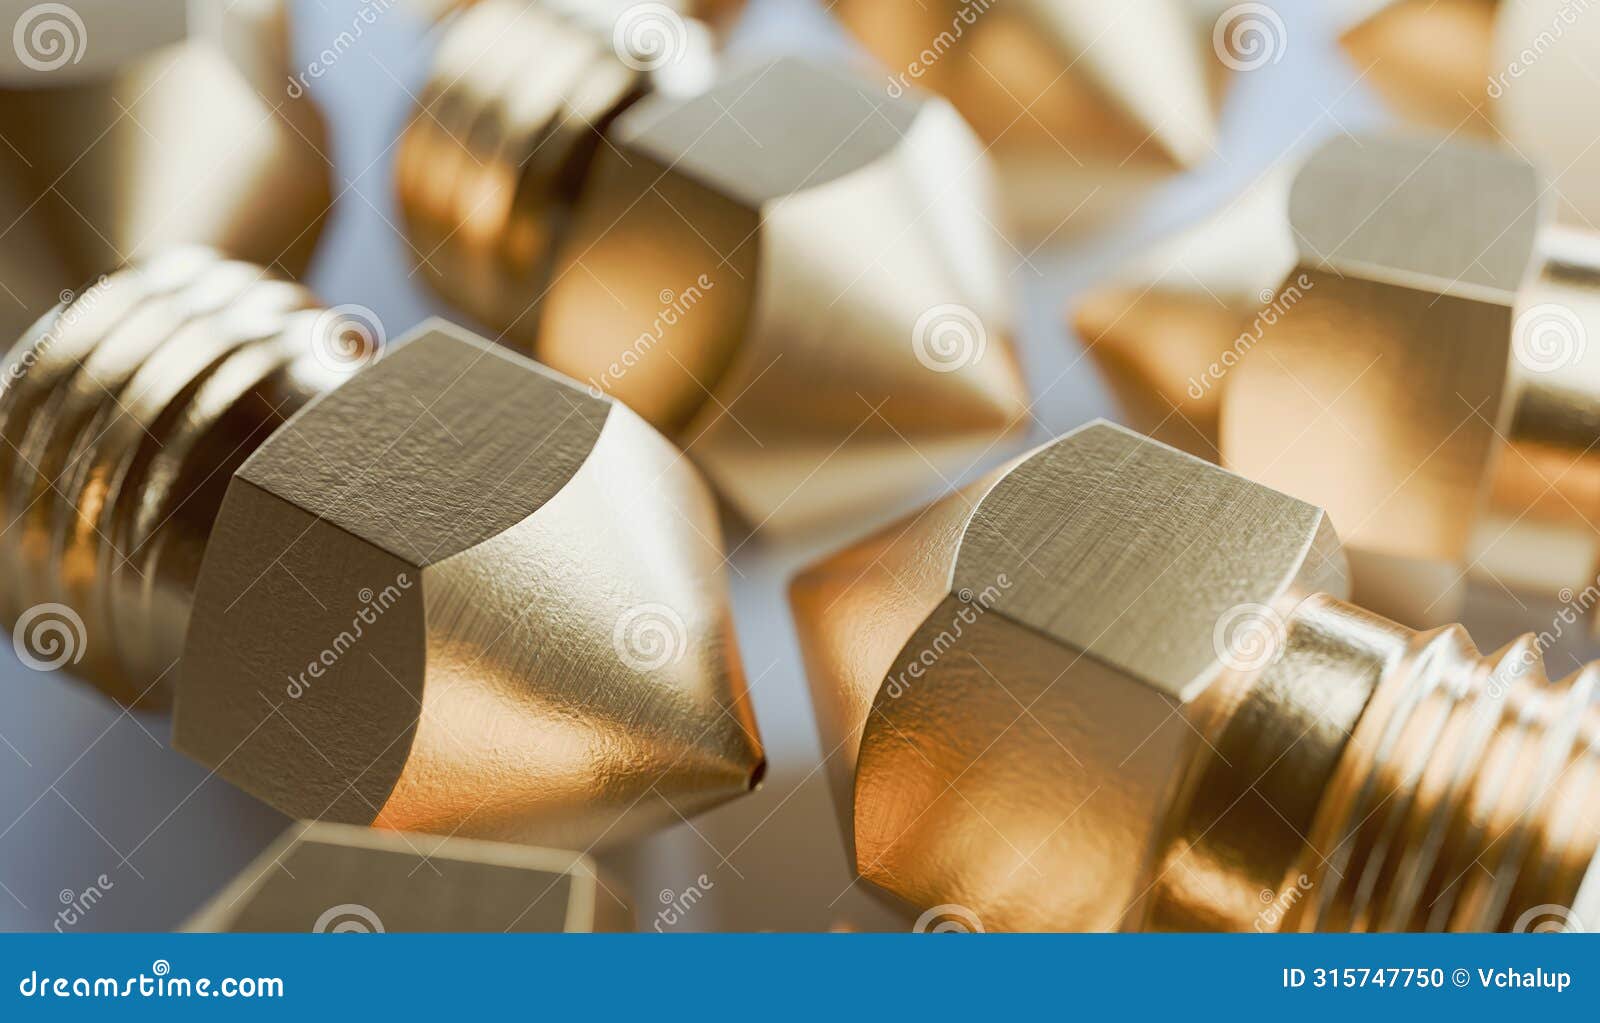 many brass nozzles for 3d printer with different sizes. 3d rendered 